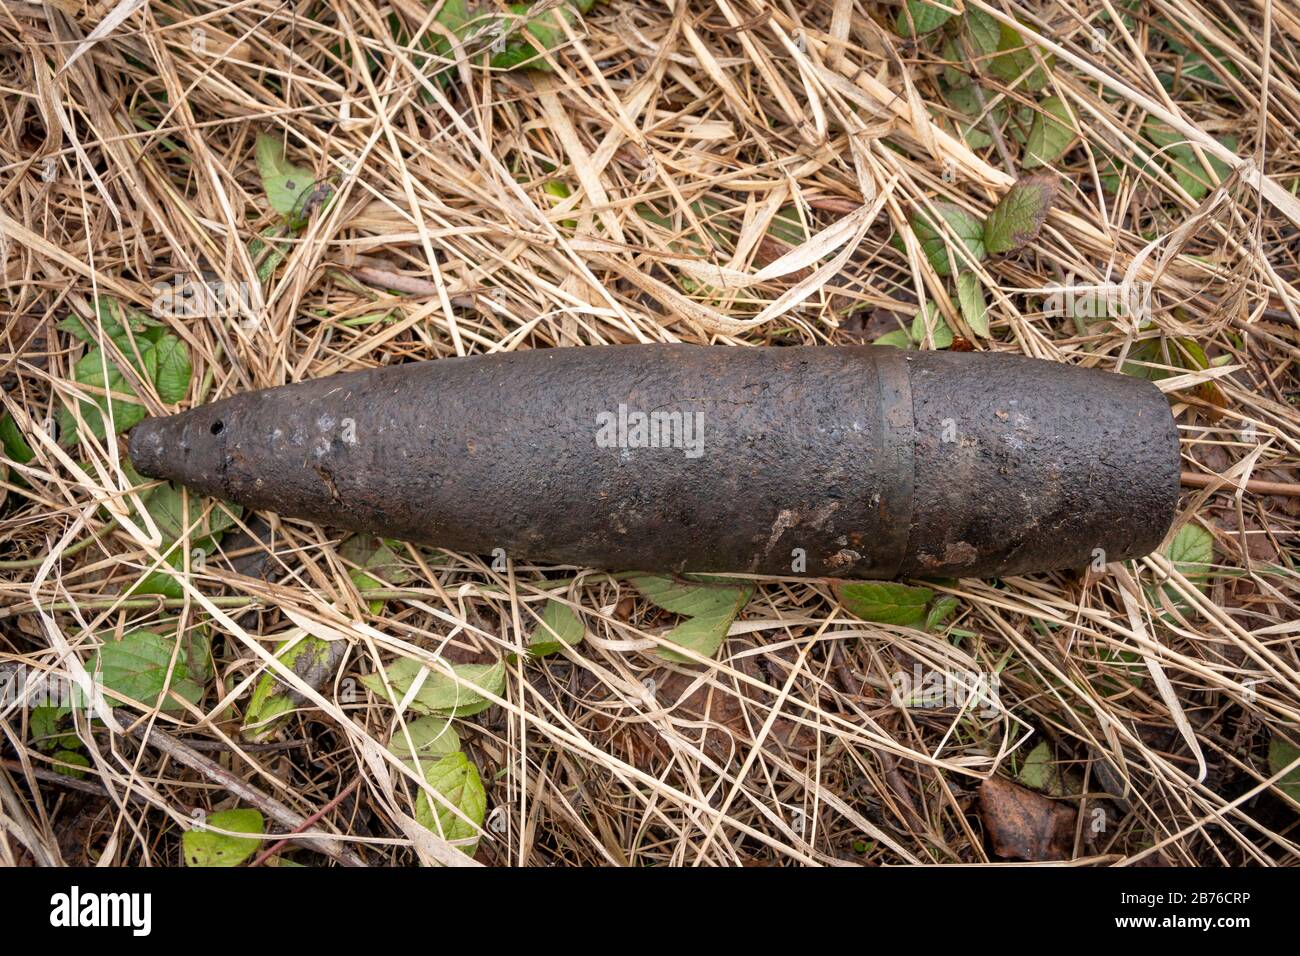 UXO unexploded ordnance - Unexploded bullet from World War II found in the forests of the Eastern Carpathians in Poland, Europe. Stock Photo